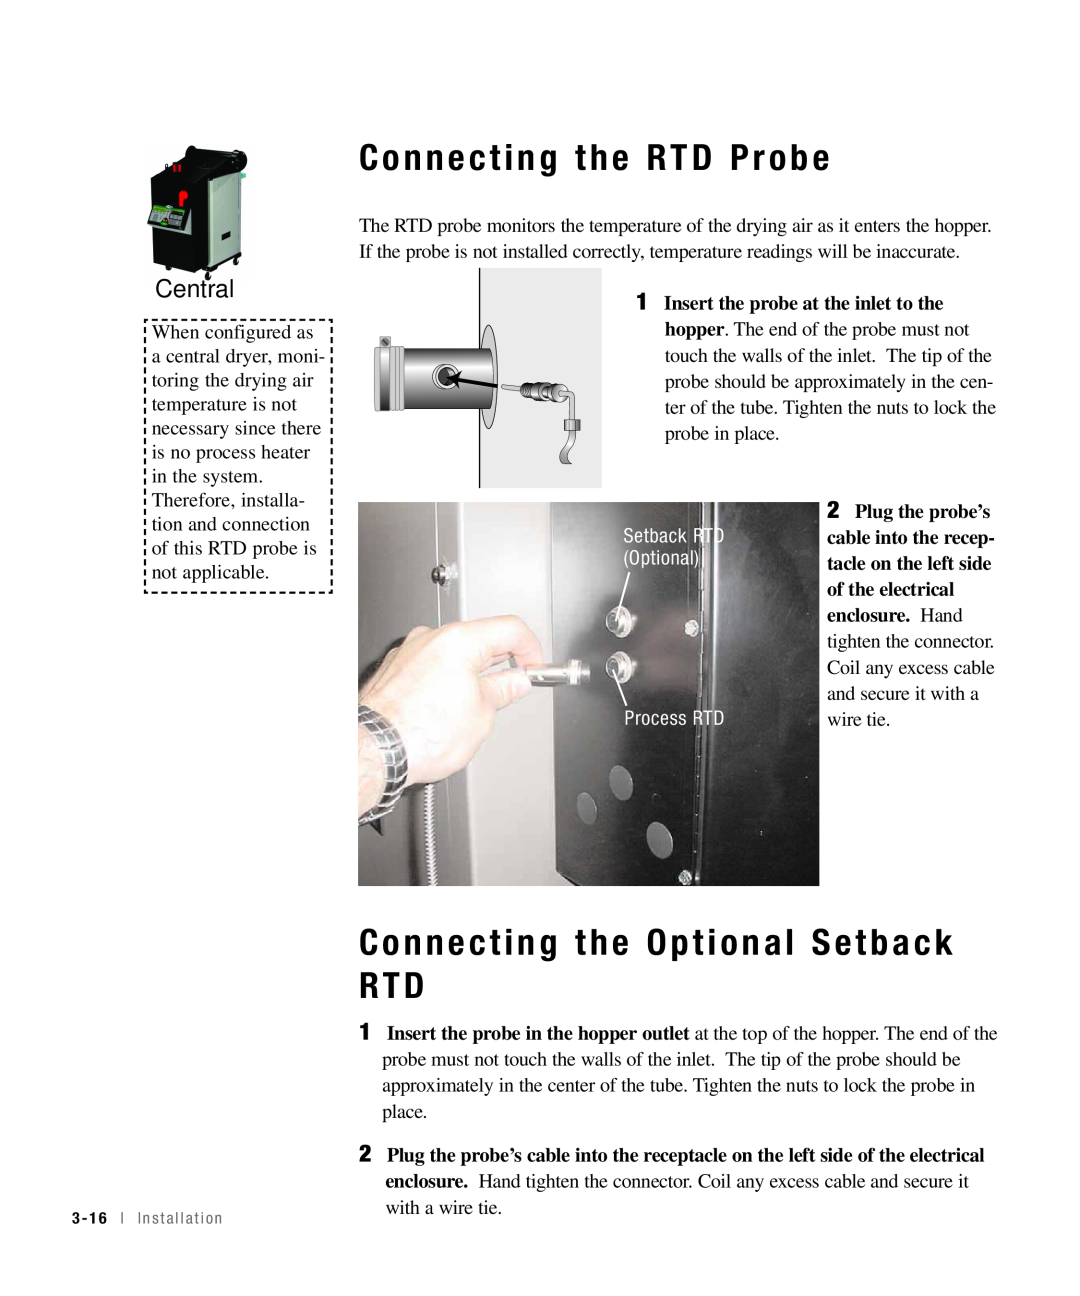 Conair 50, 25, 15, 100 specifications Connecting the RTD Probe, Connecting the Optional Setback RTD, Central, Process RTD 